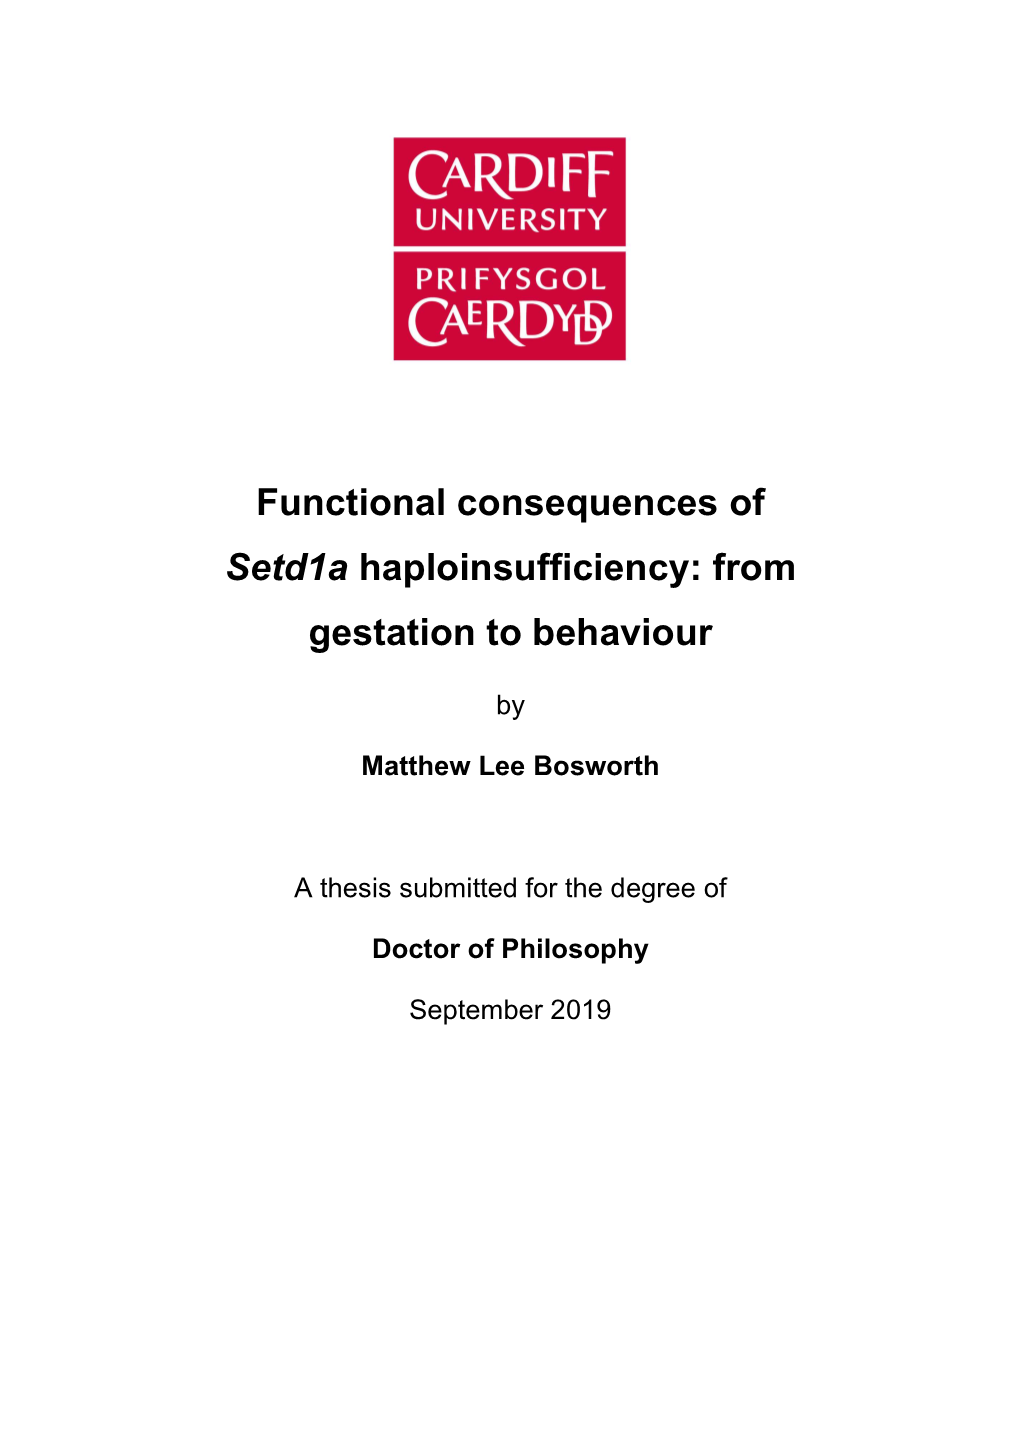 Functional Consequences of Setd1a Haploinsufficiency: from Gestation to Behaviour